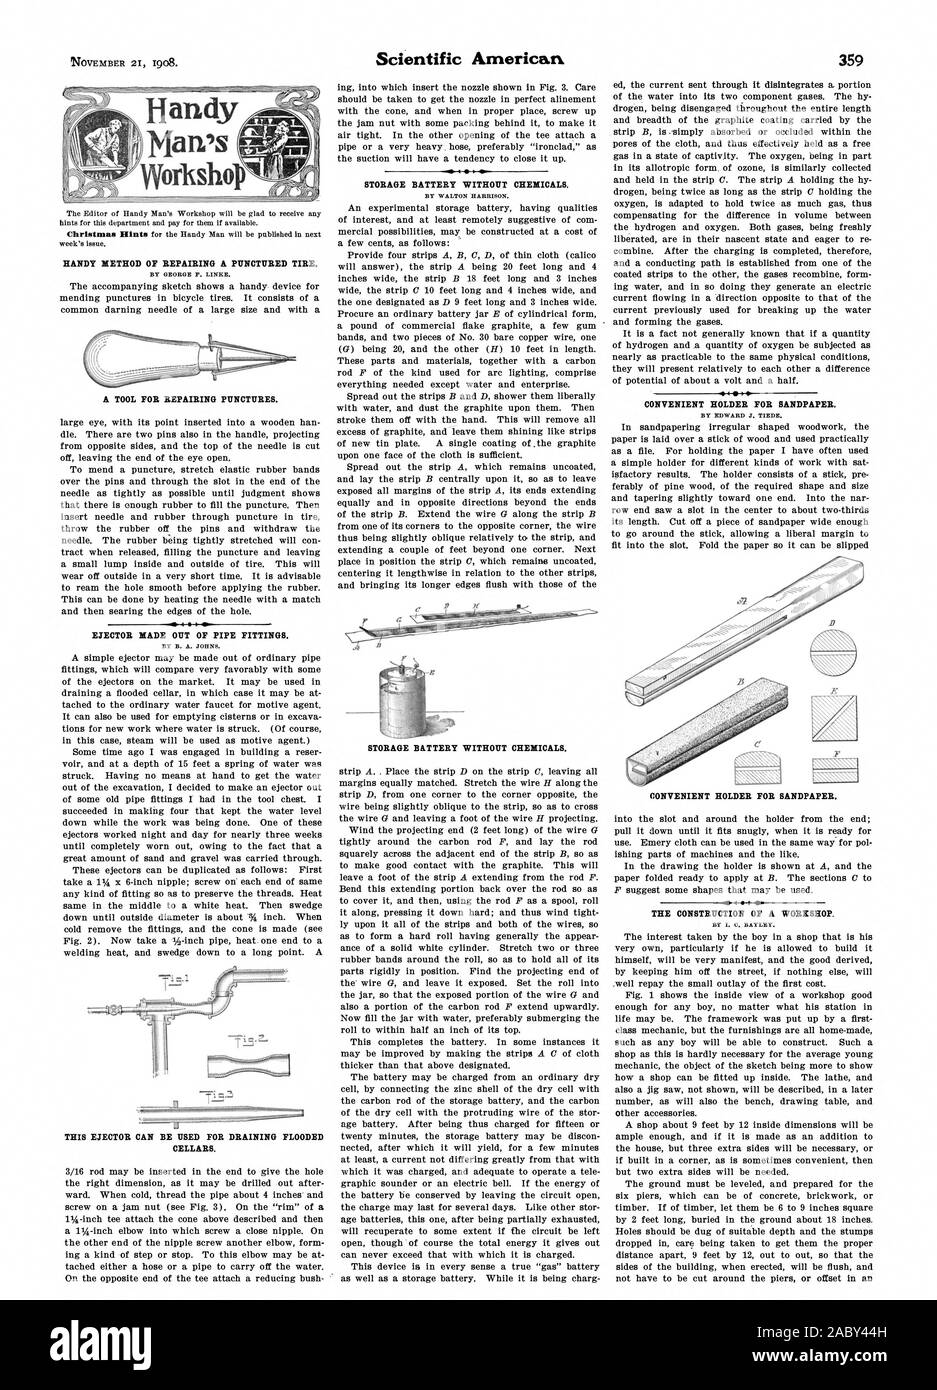 HANDY METHOD OF REPAIRING A PUNCTURED TIRE. A TOOL FOR REPAIRING PUNCTURES. EJECTOR MADE OUT OF PIPE FITTINGS. THIS EJECTOR CAN BE USED FOR DRAINING FLOODED CELLARS. STORAGE BATTERY WITHOUT CHEMICALS. STORAGE BATTERY WITHOUT CHEMICALS. CONVENIENT HOLDER FOR SANDPAPER. THE CONSTRUCTION OF A WORKSHOP. N CONVENIENT HOLDER FOR SANDPAPER., scientific american, 1908-11-21 Stock Photo